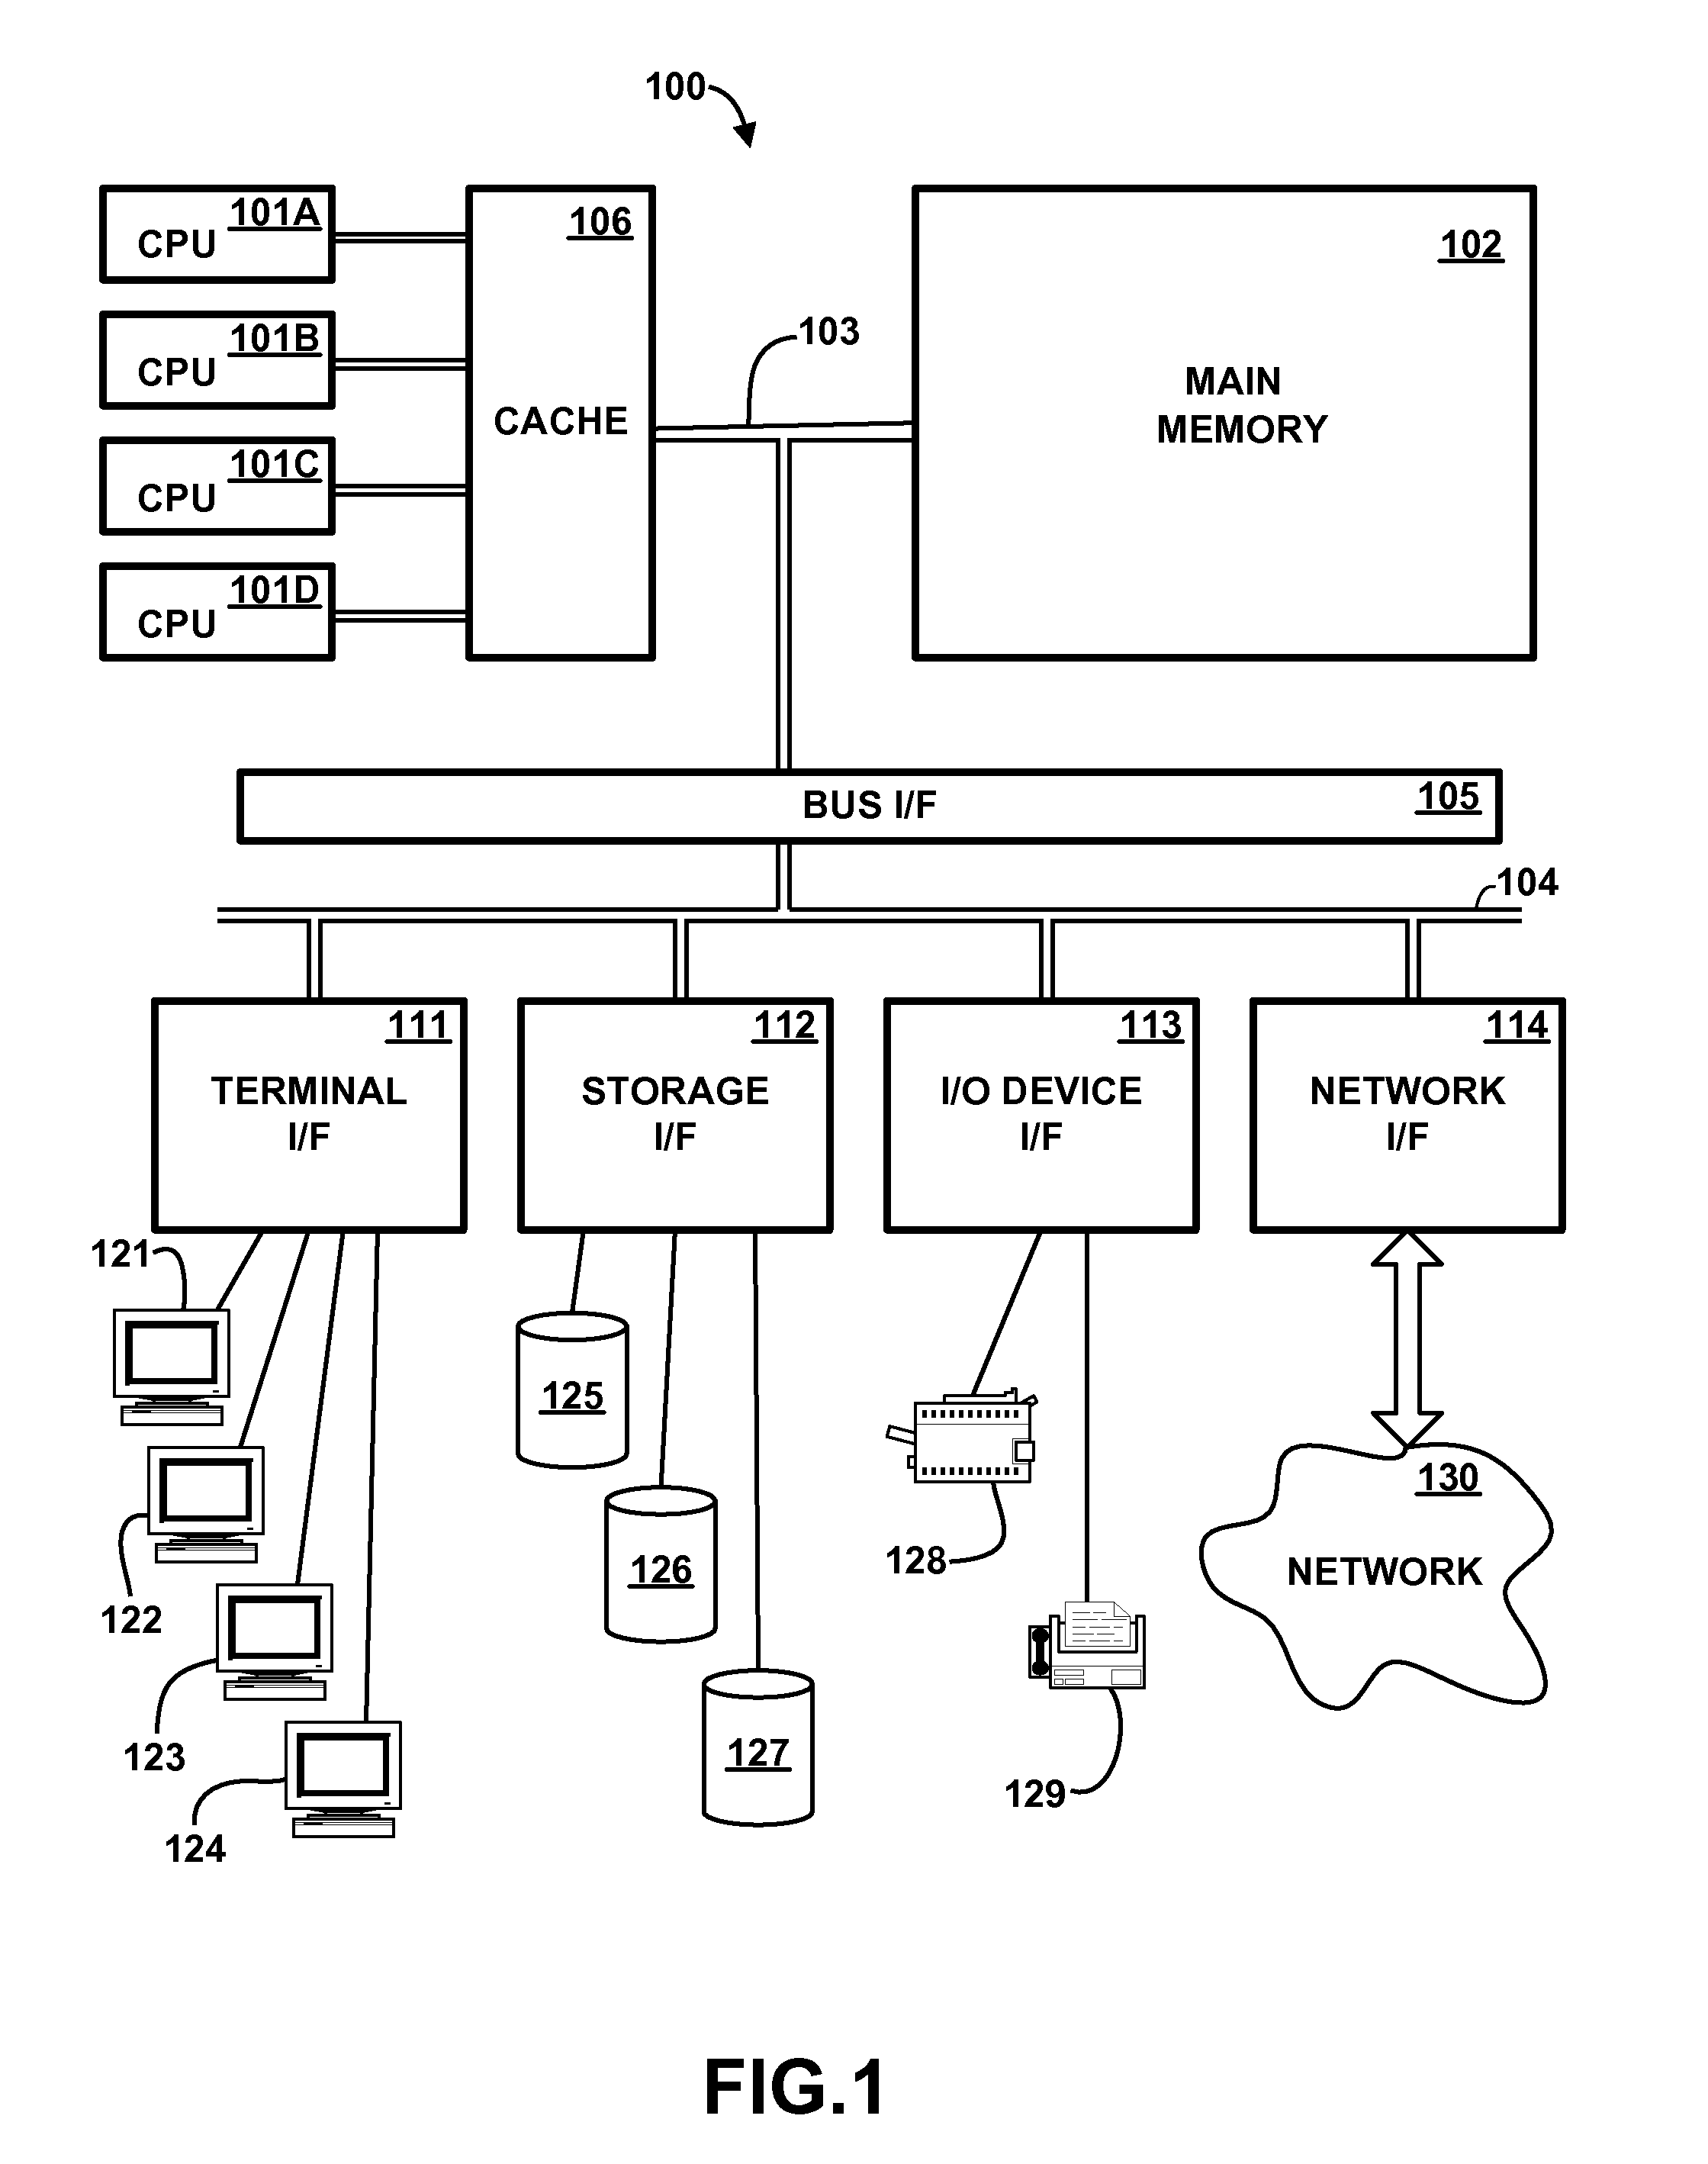 Dual-Mode Memory Chip for High Capacity Memory Subsystem